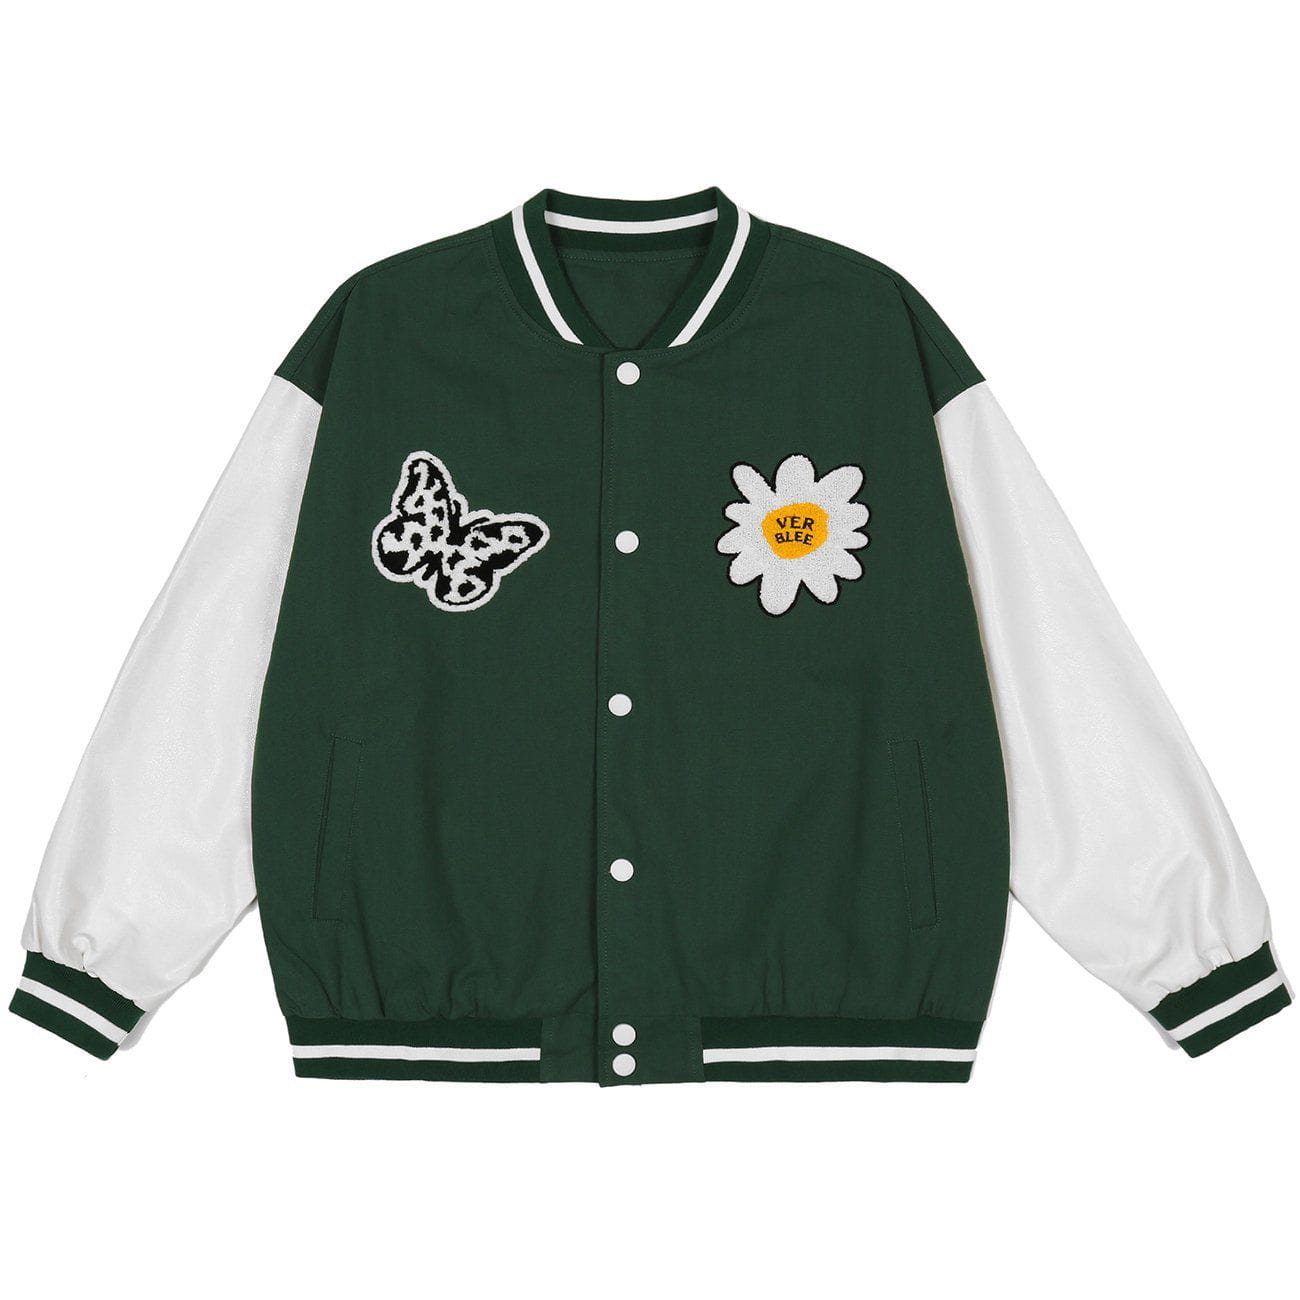 Spotted Butterfly Daisy Embroidery Varsity Jacket Streetwear Brand Techwear Combat Tactical YUGEN THEORY